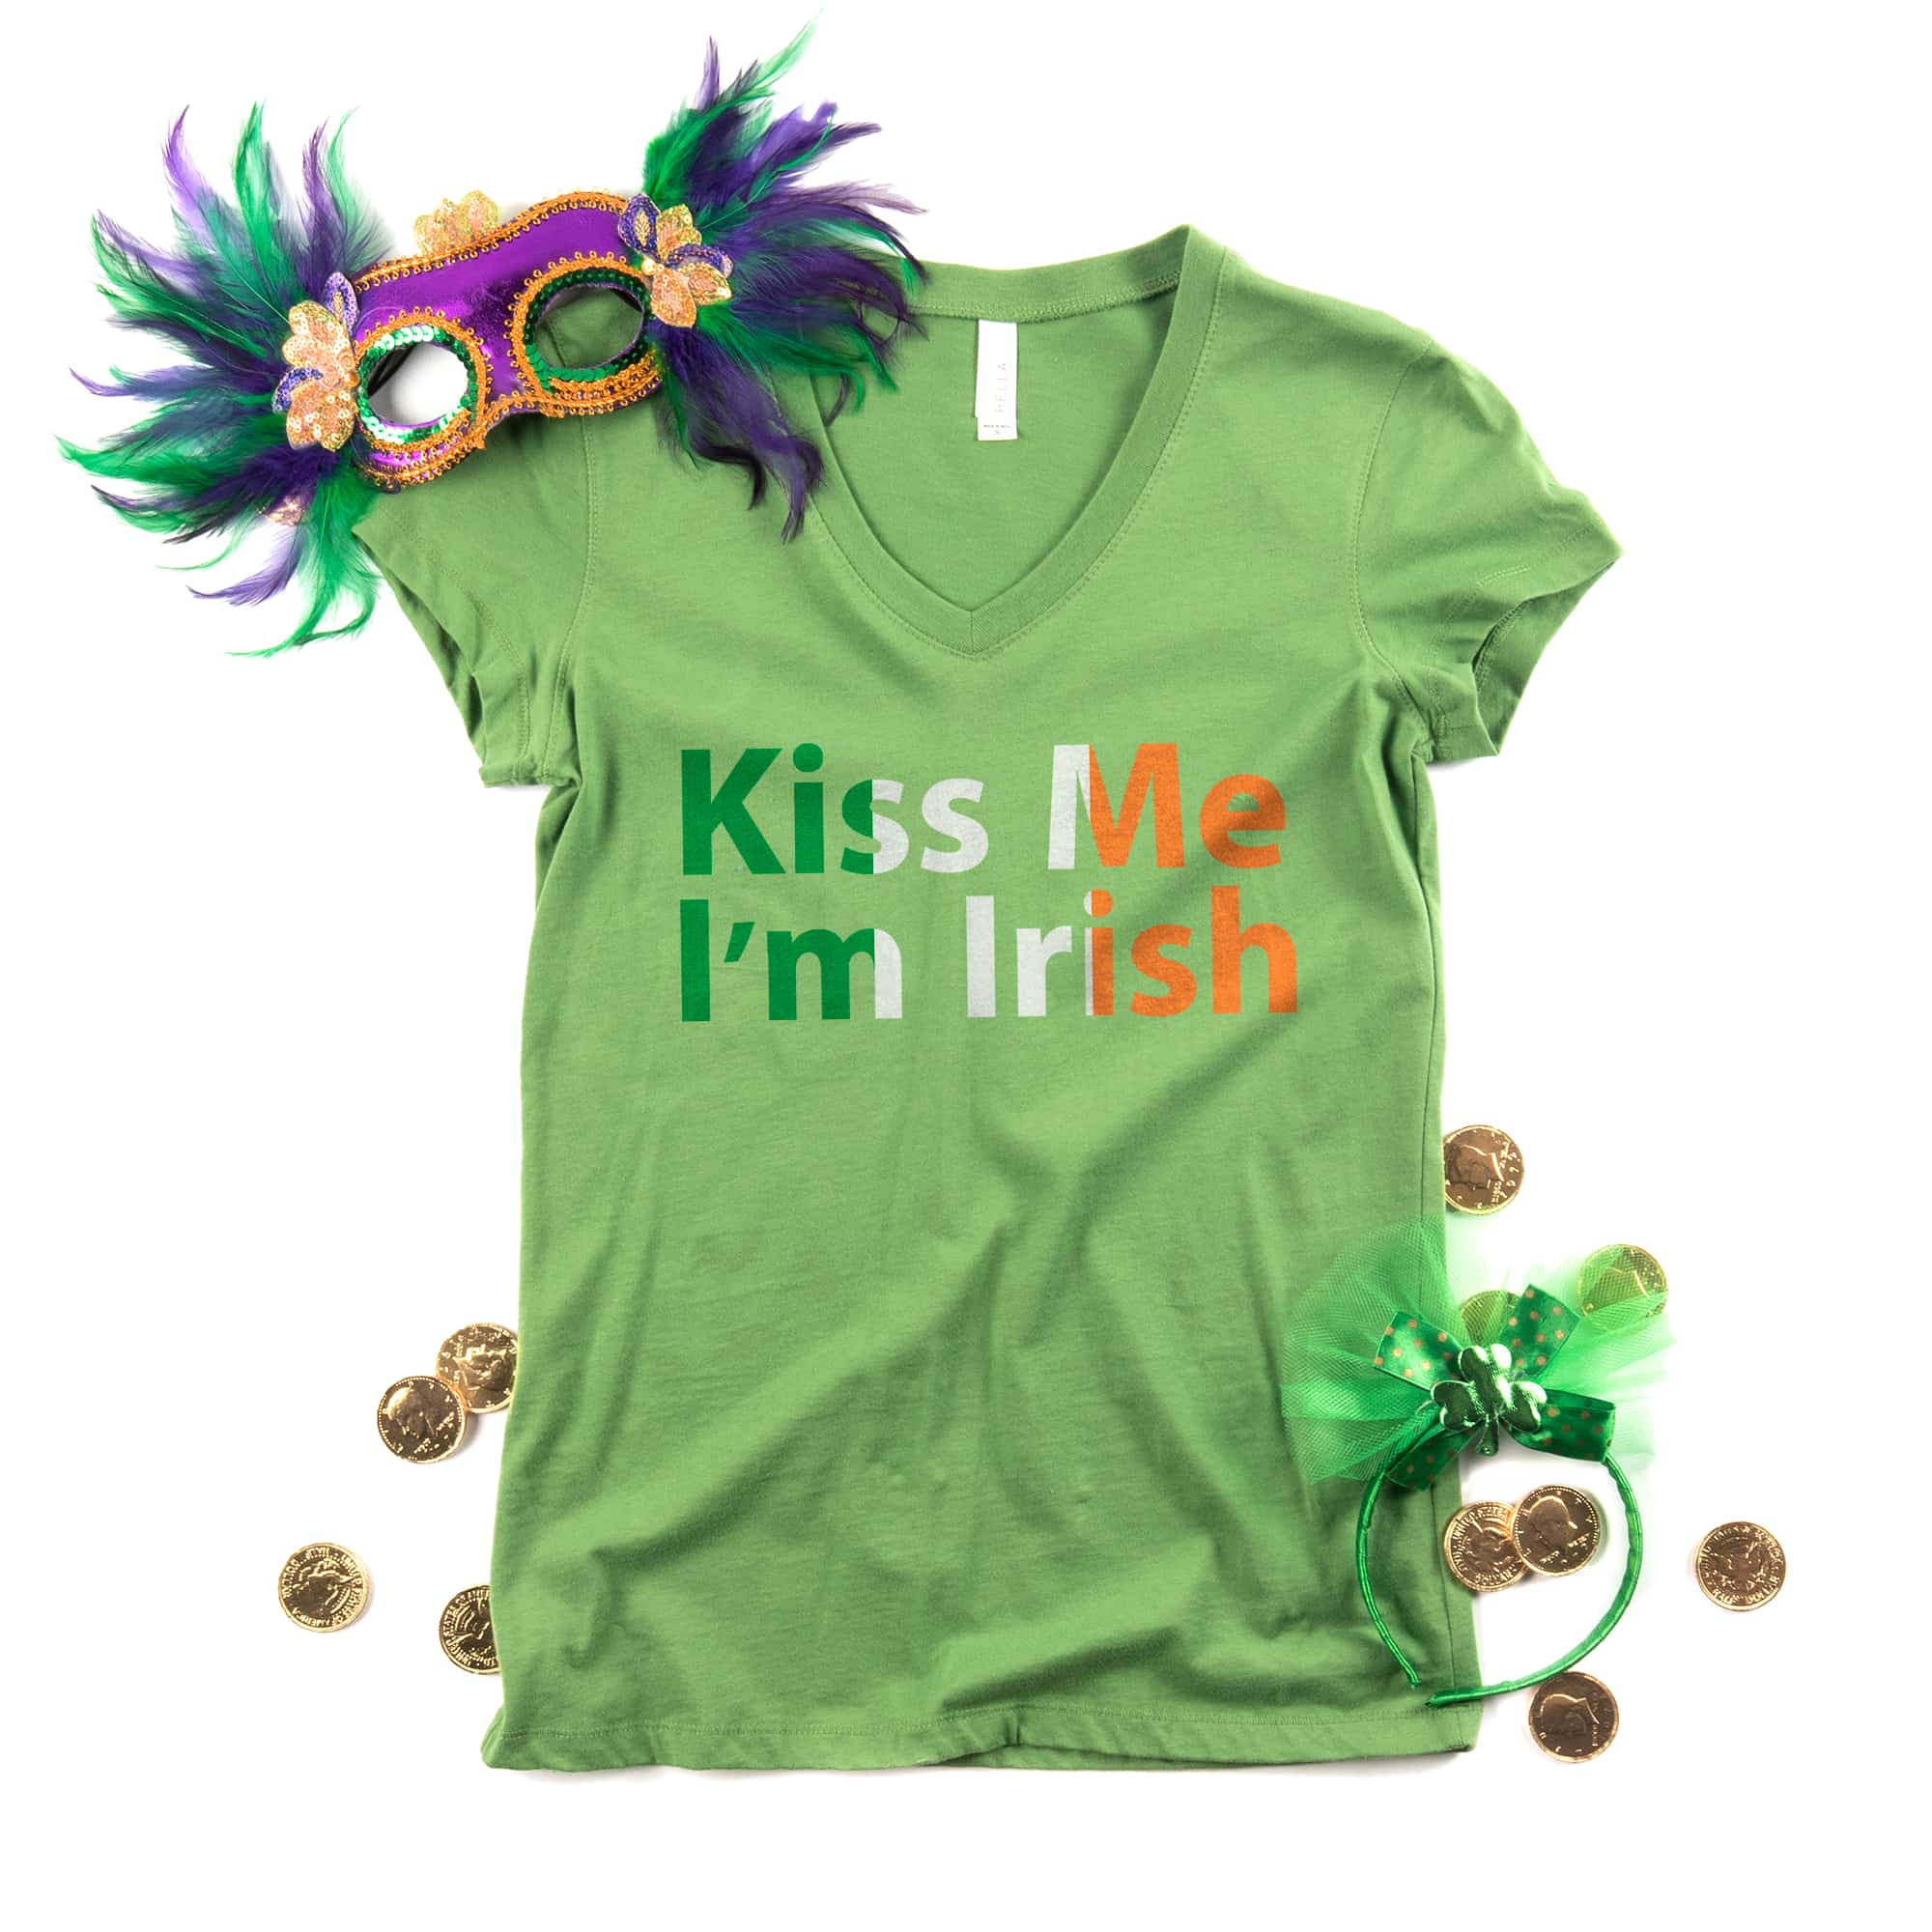 An example St. Patrick's day t-shirt design on a Canvas Ladies V-Neck.